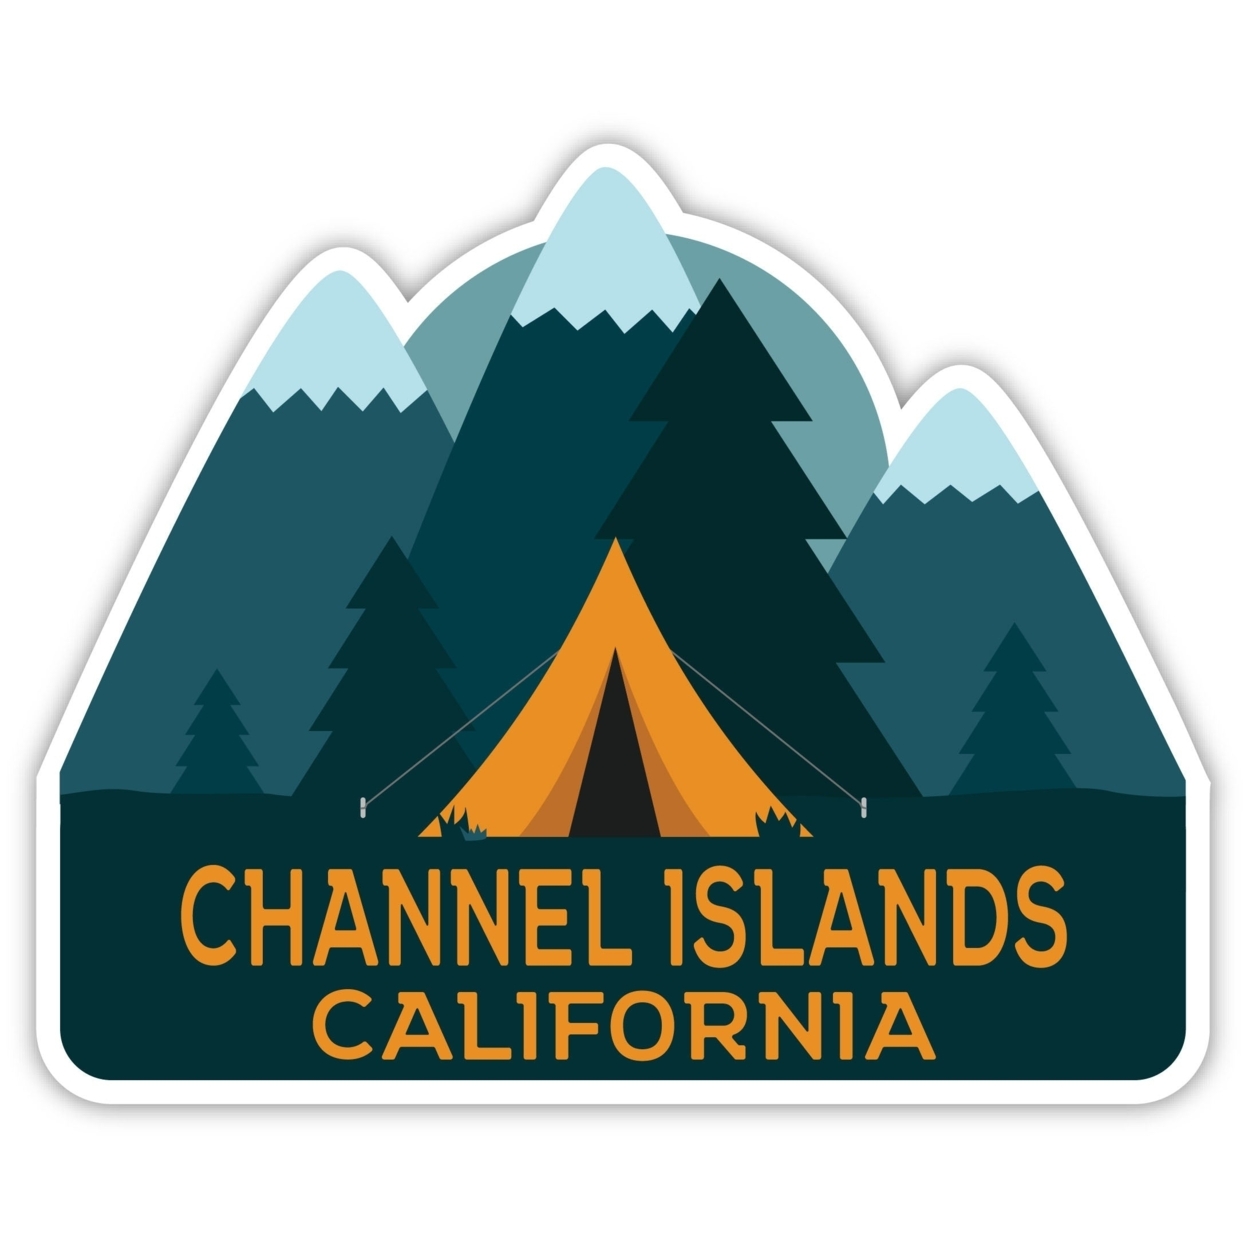 Channel Islands California Souvenir Decorative Stickers (Choose Theme And Size) - 4-Pack, 2-Inch, Tent